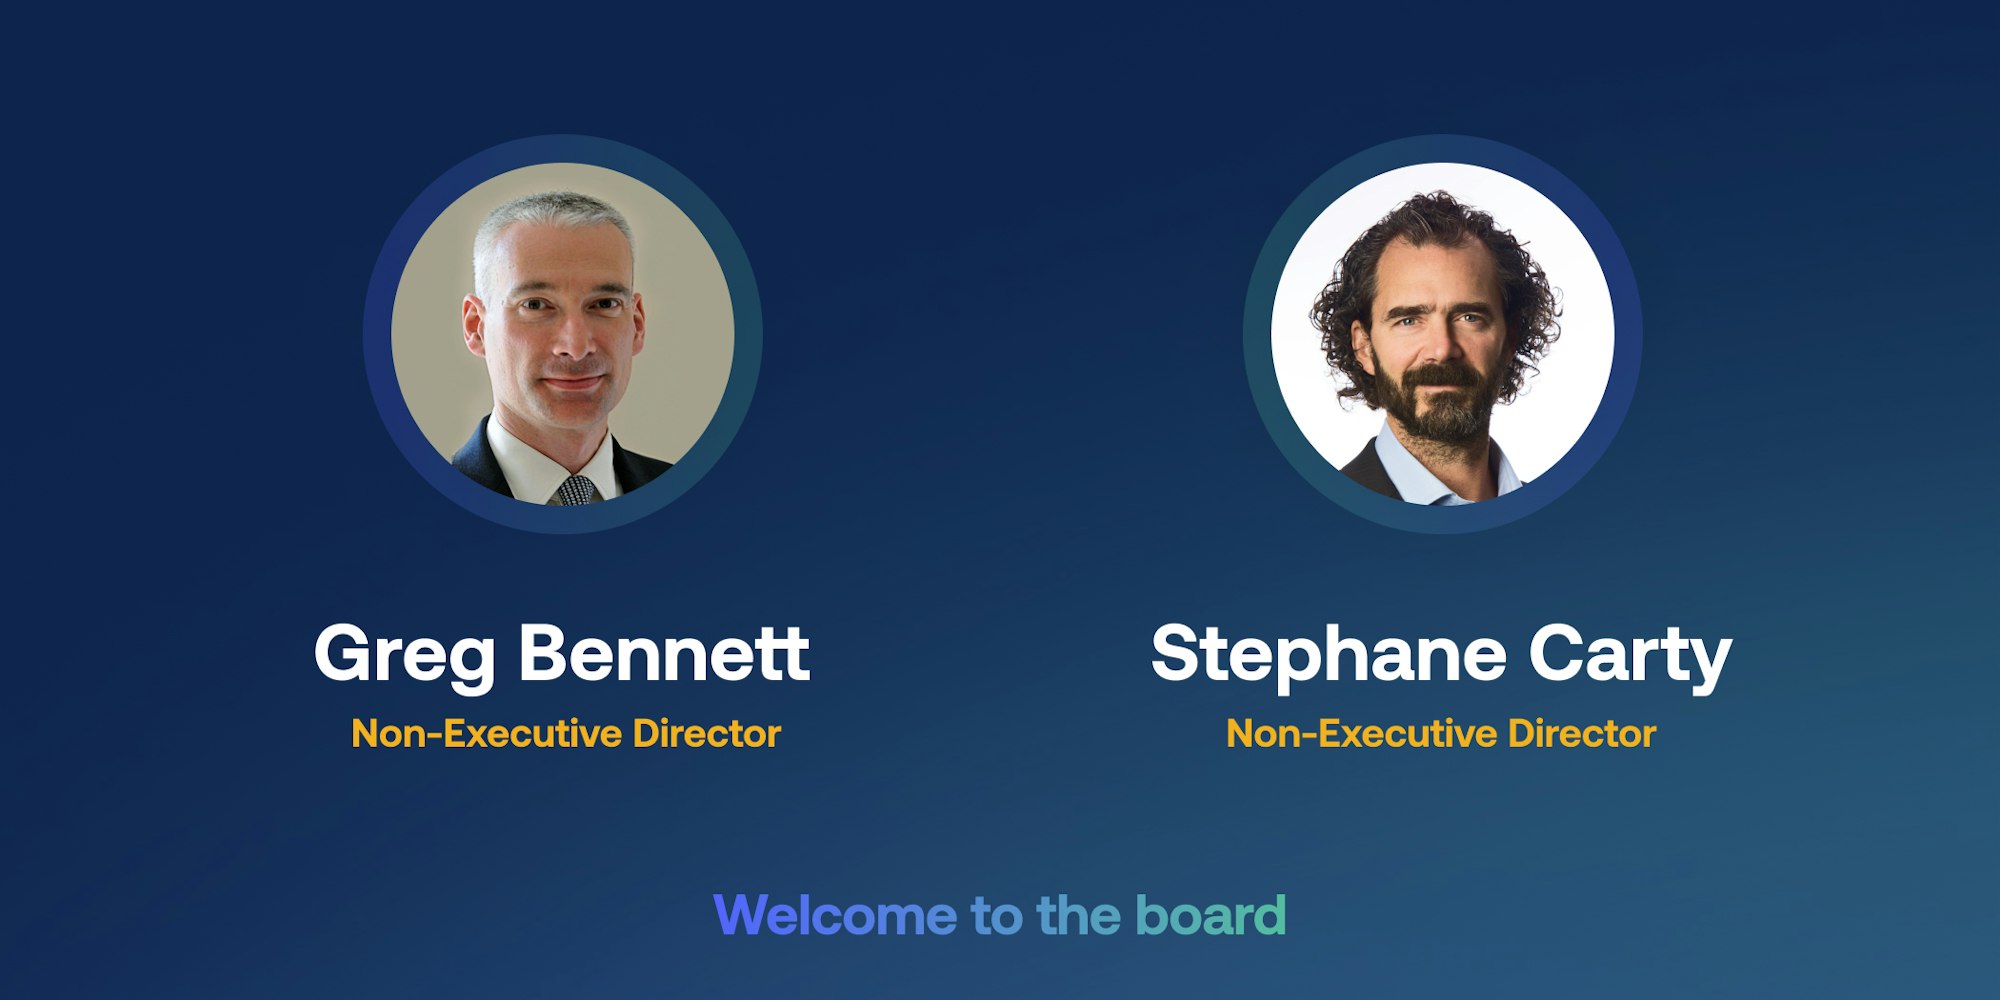 Appital Appoints Former Fidelity Head of Capital Markets Greg Bennett and Founder of Blackheath Capital Management Stephane Carty as Non-Executive Directors 